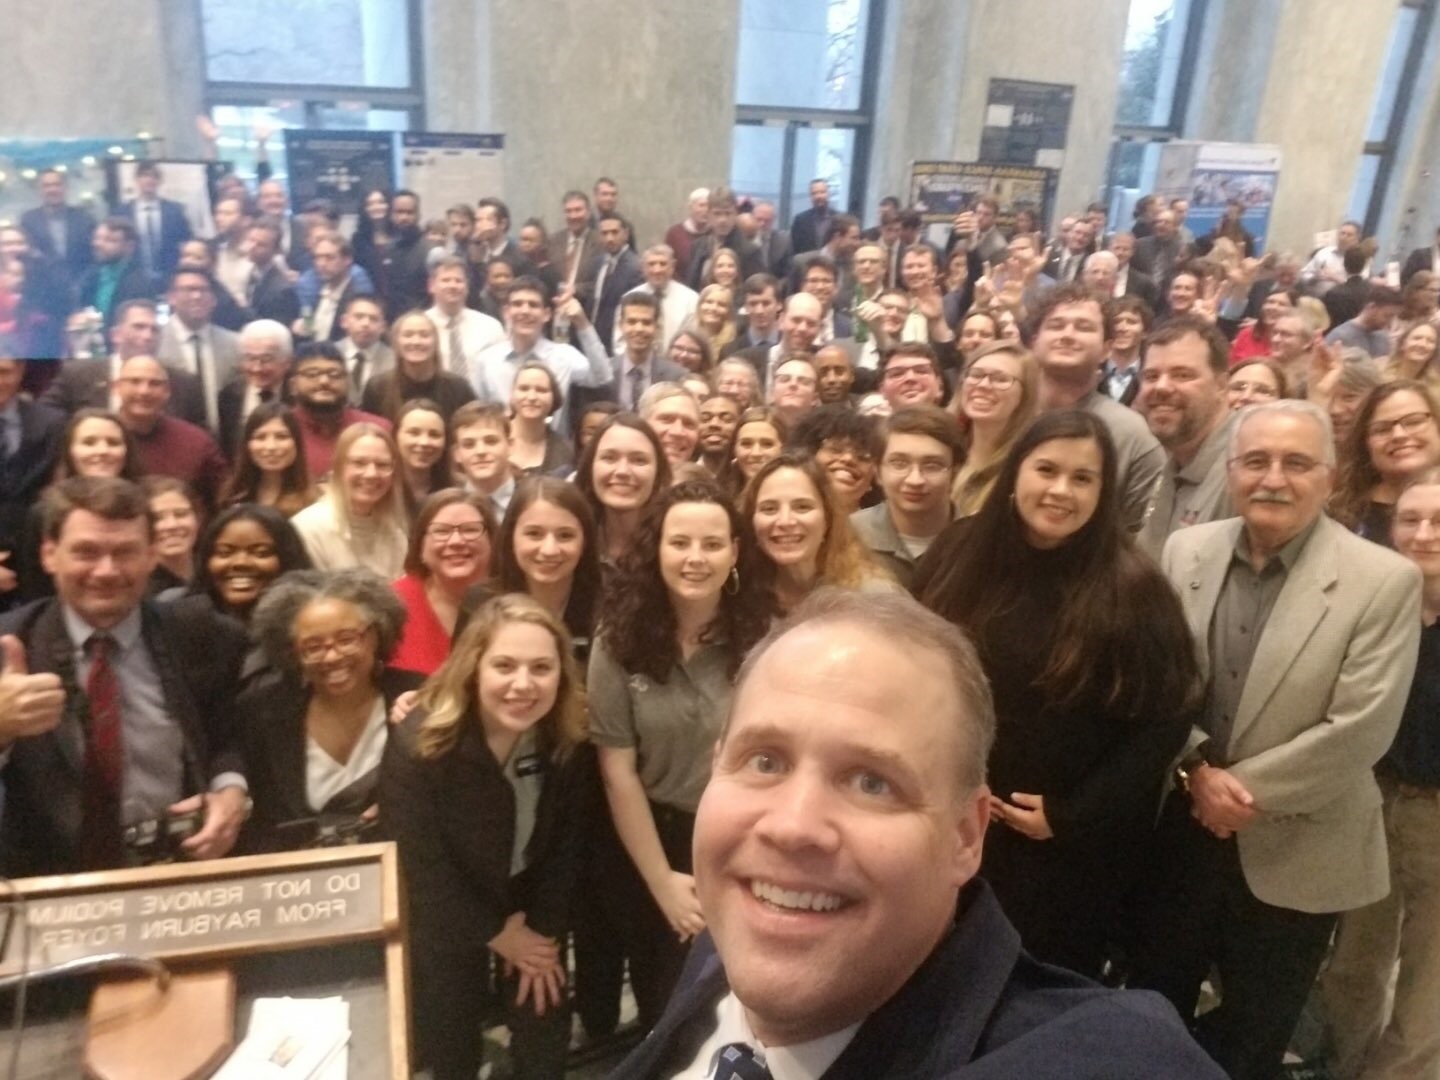 NASA Administrator, Jim Bridenstine, with Space Grant students and consortium members at the 30th anniversary celebration.